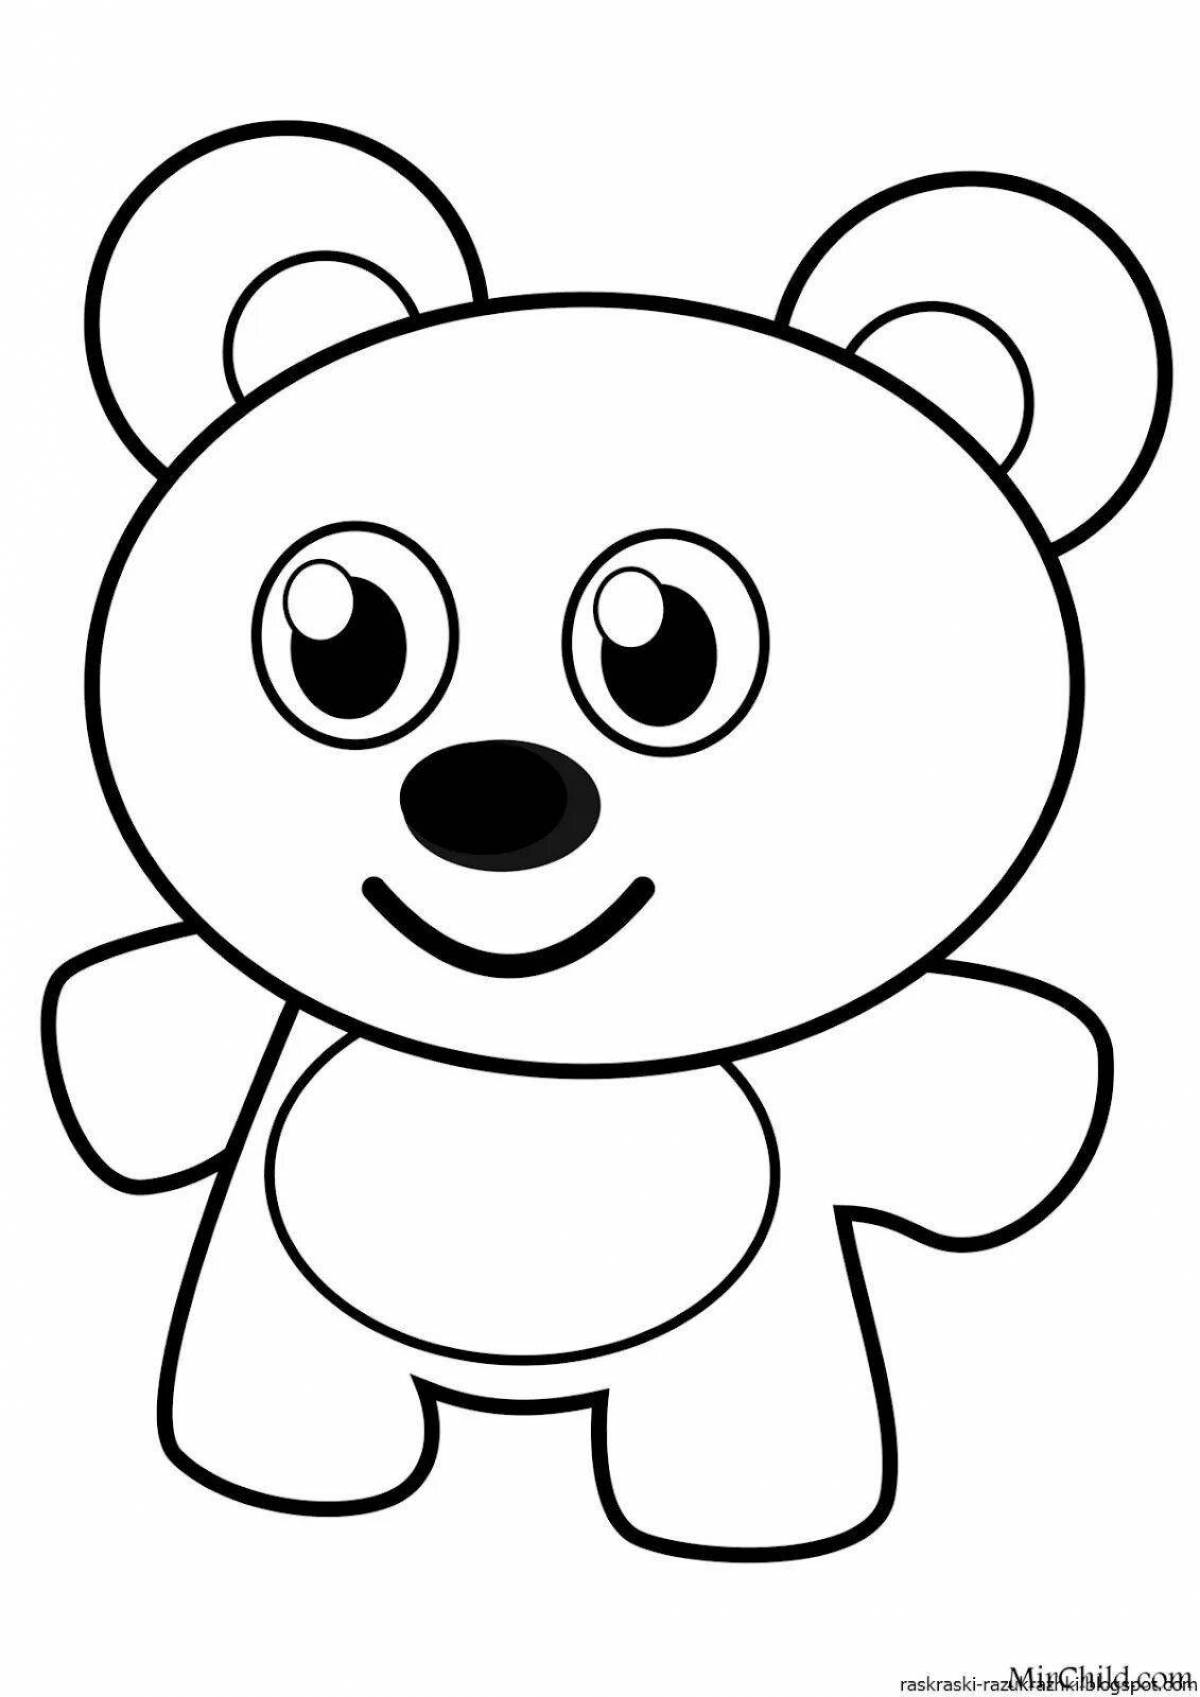 Gorgeous bear coloring book for 2-3 year olds